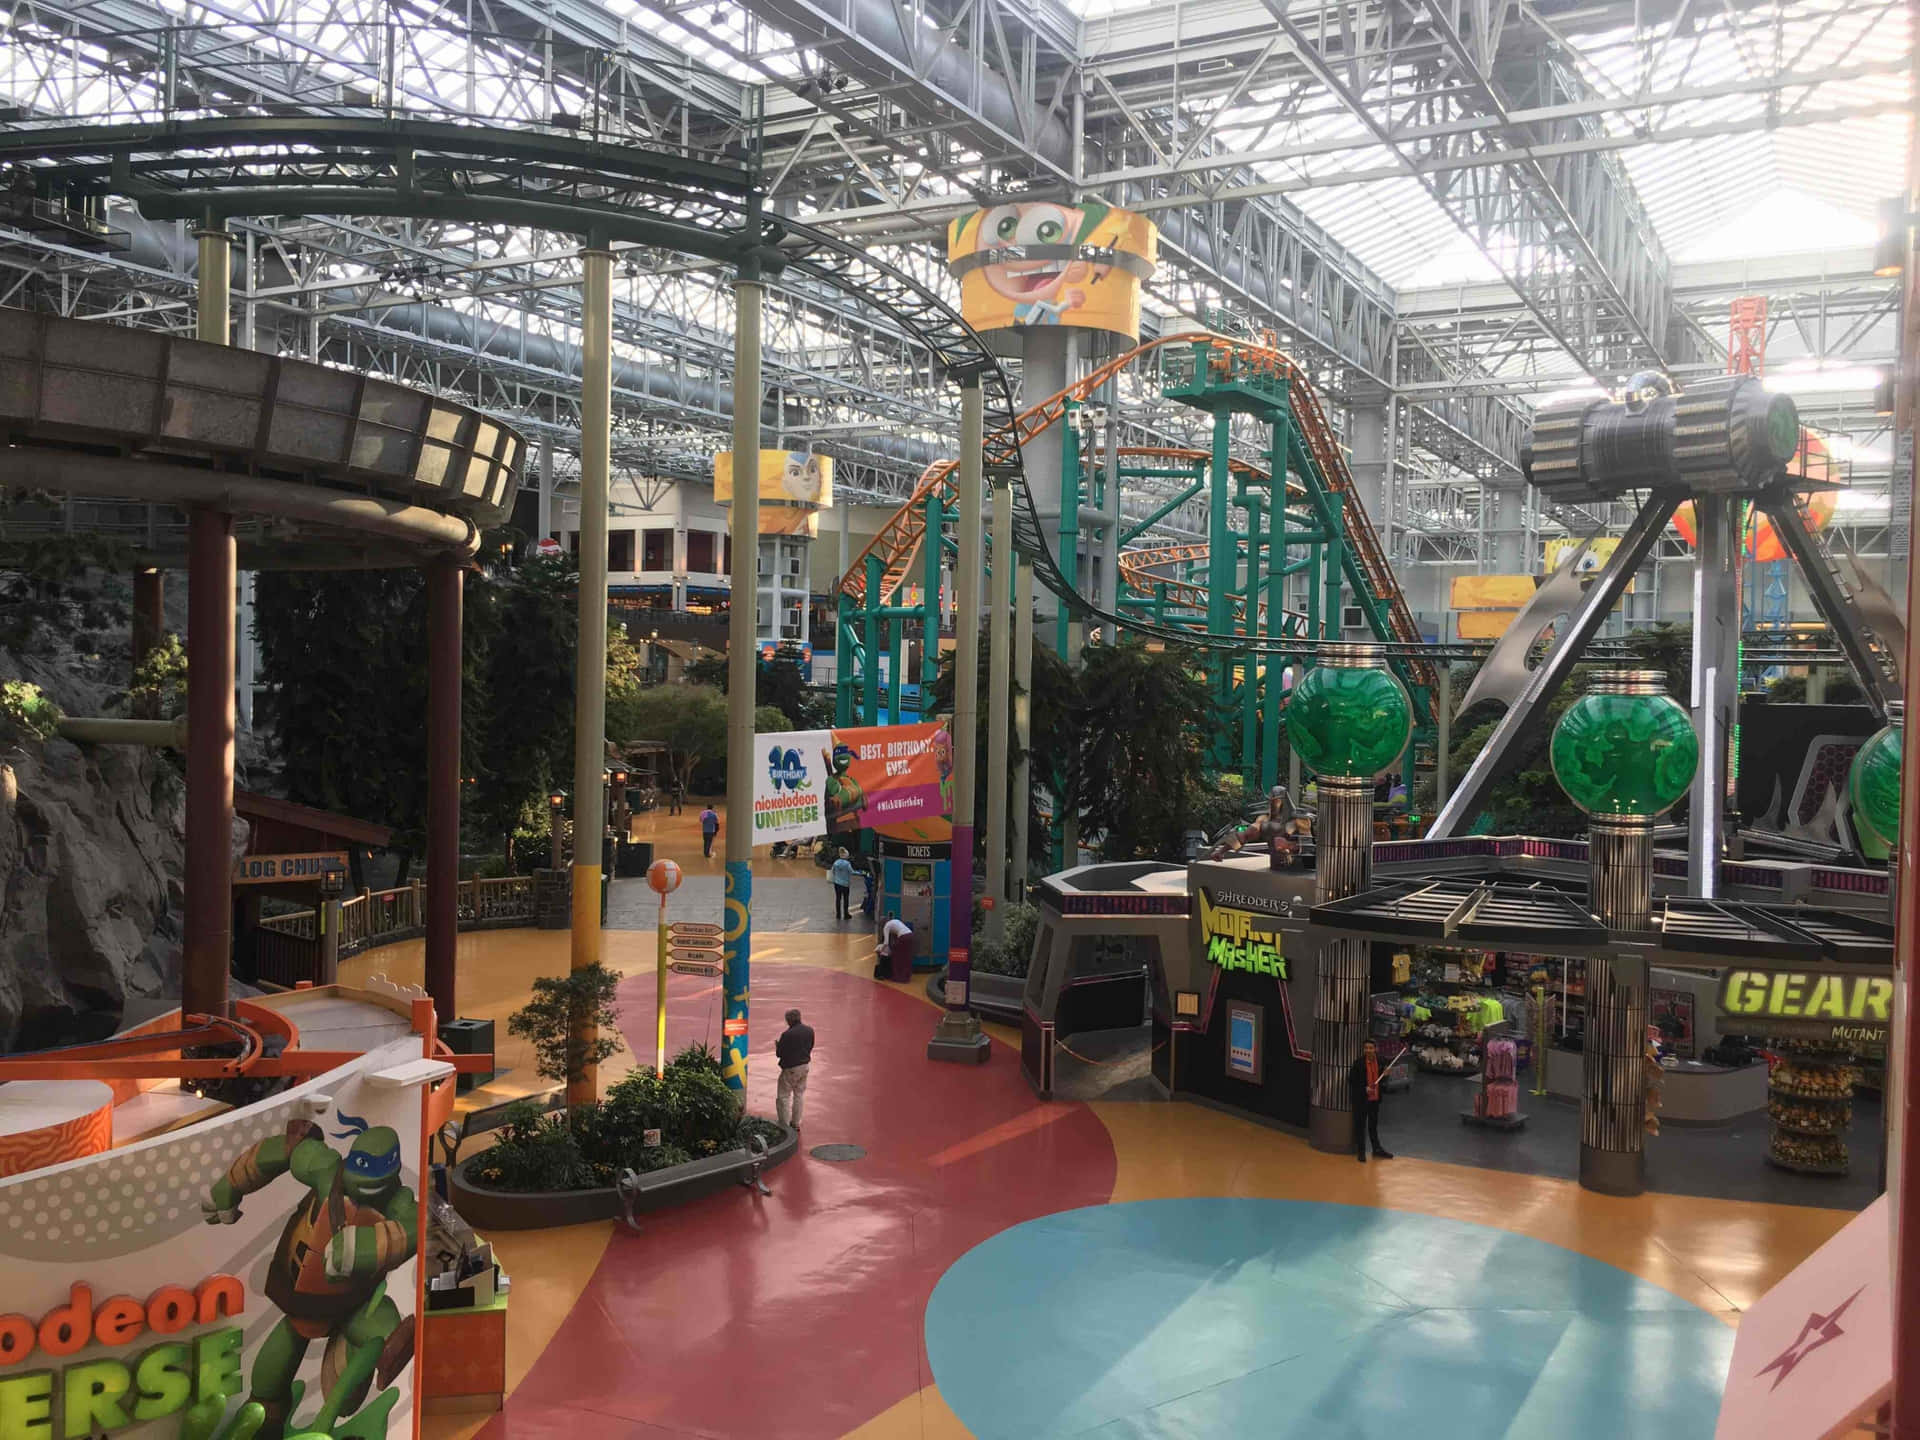 A Large Indoor Amusement Park With Many Rides And Attractions